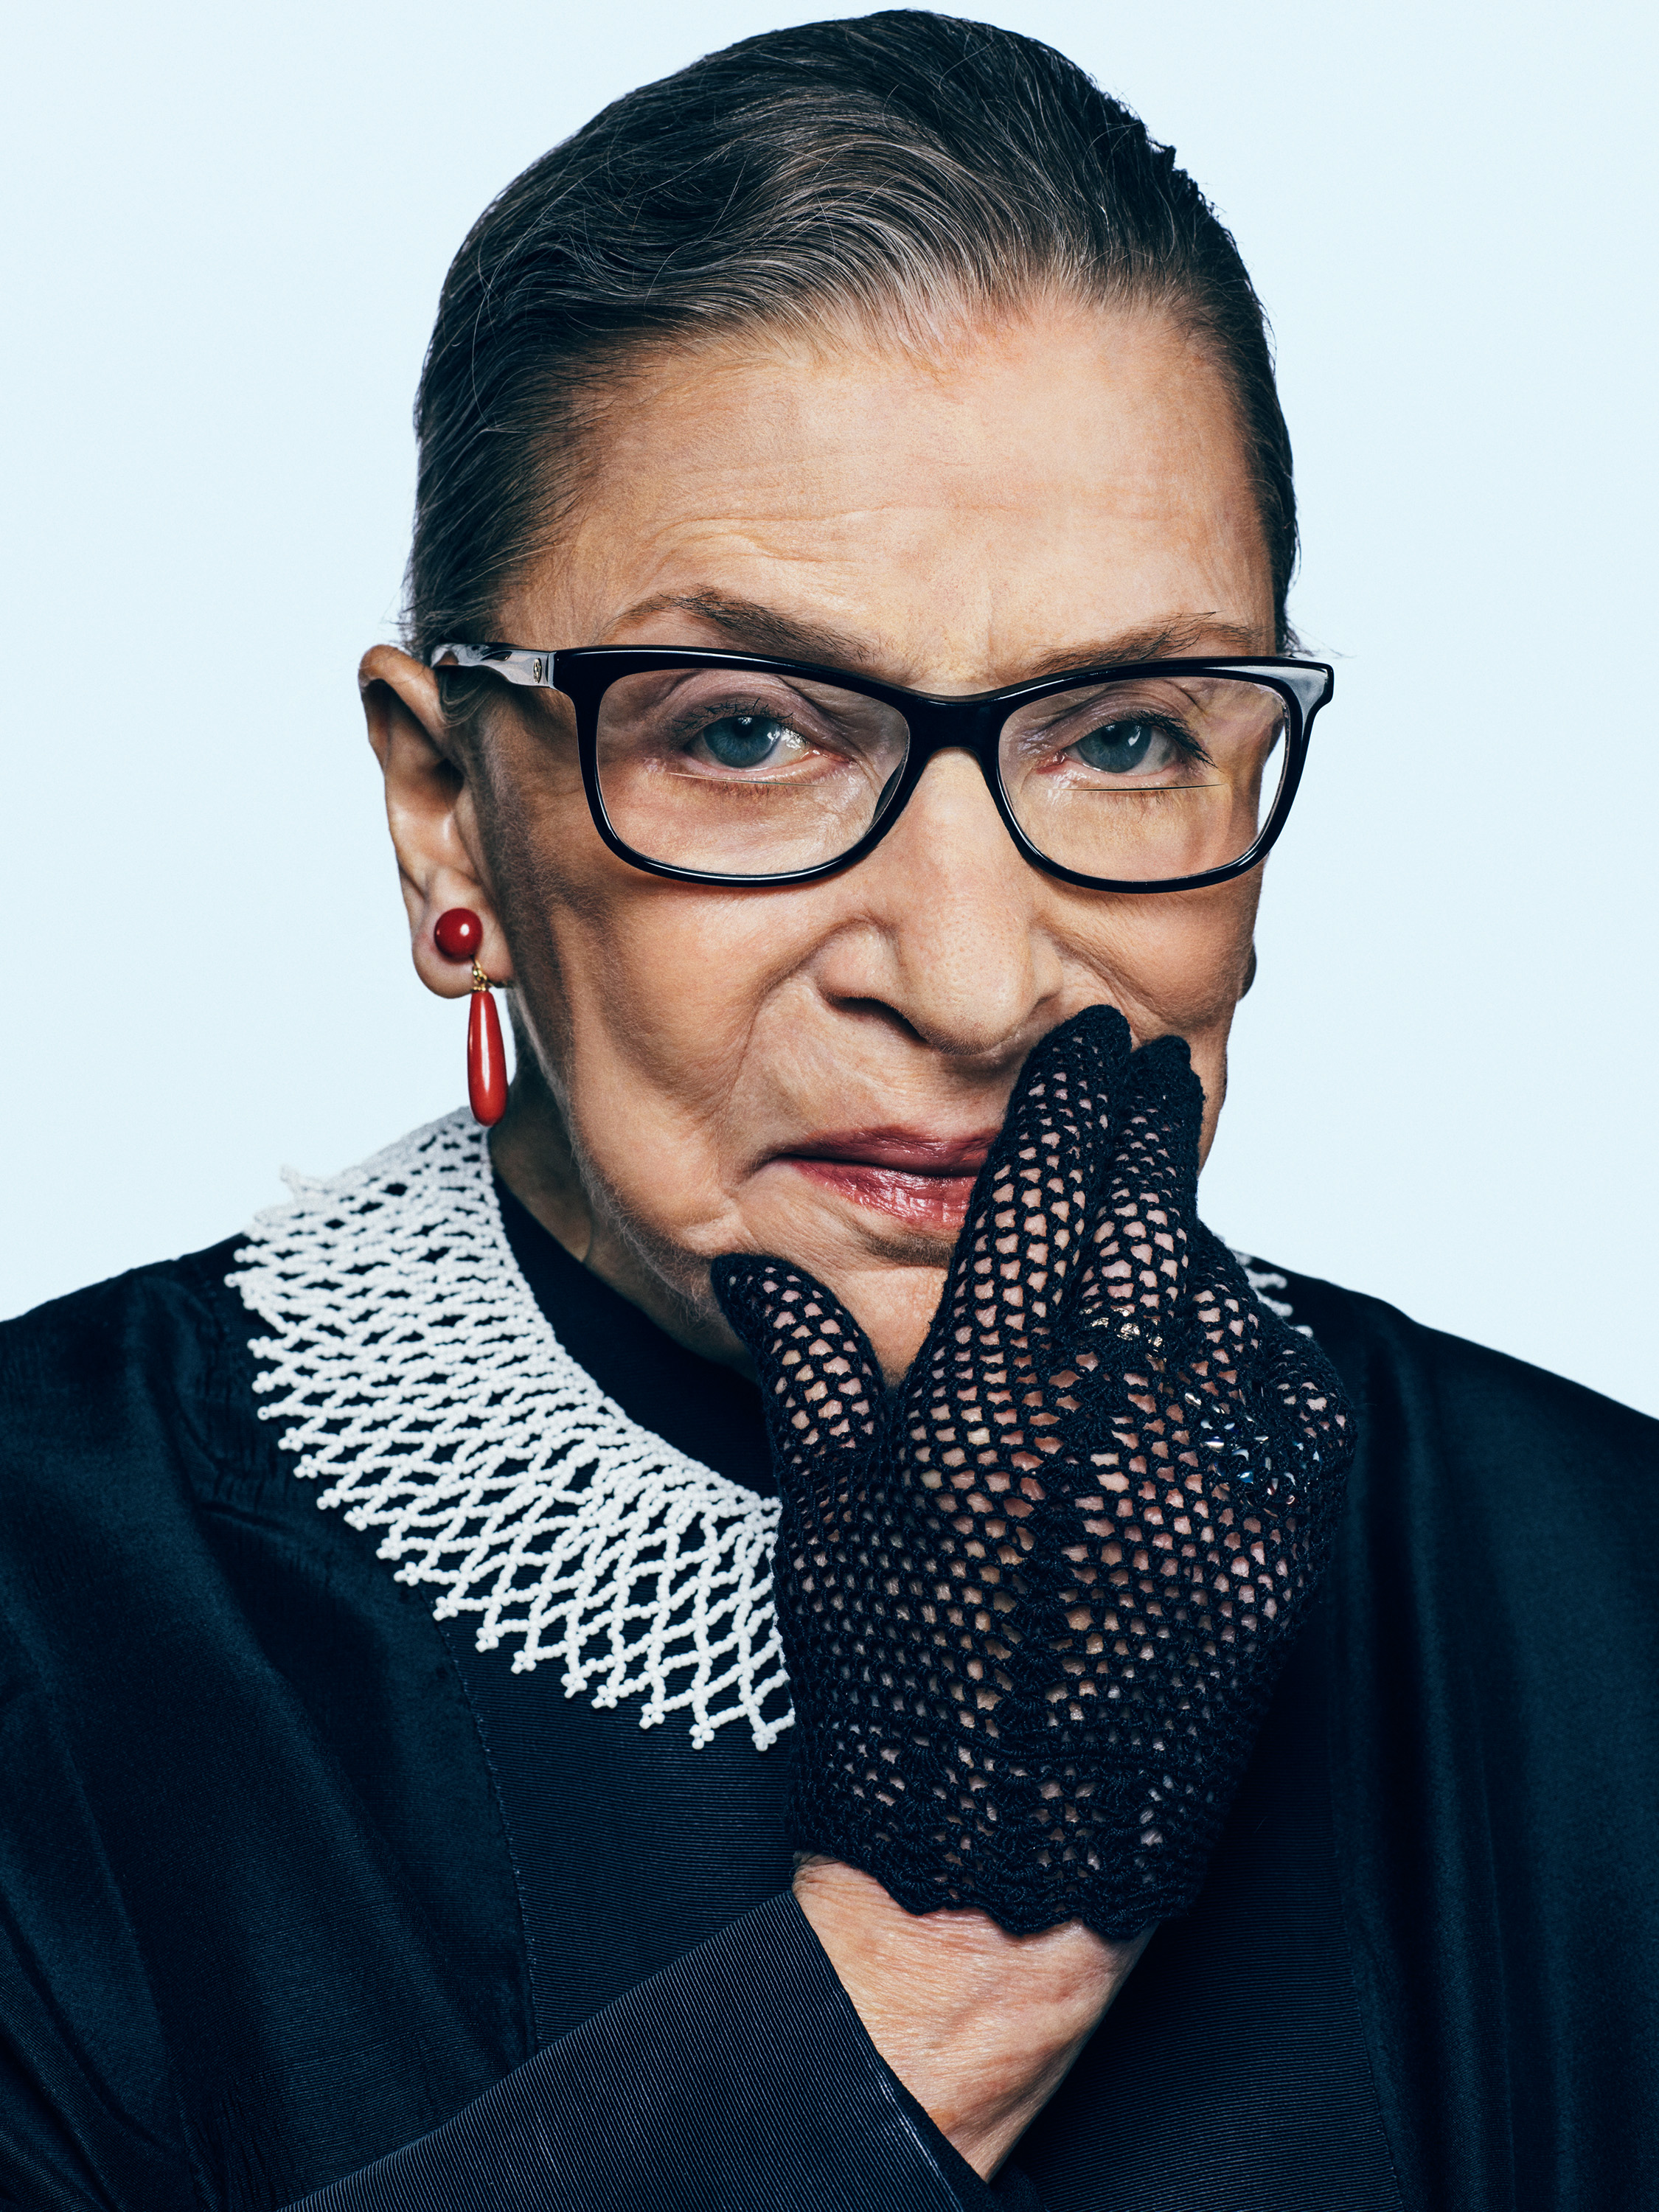 Portrait of Associate Justice of the Supreme Court of the United States Ruth Bader Ginsburg photographed on Tuesday, March 17th, 2015 at the Supreme Court East Conference Room in Washington D.C. for TIME.